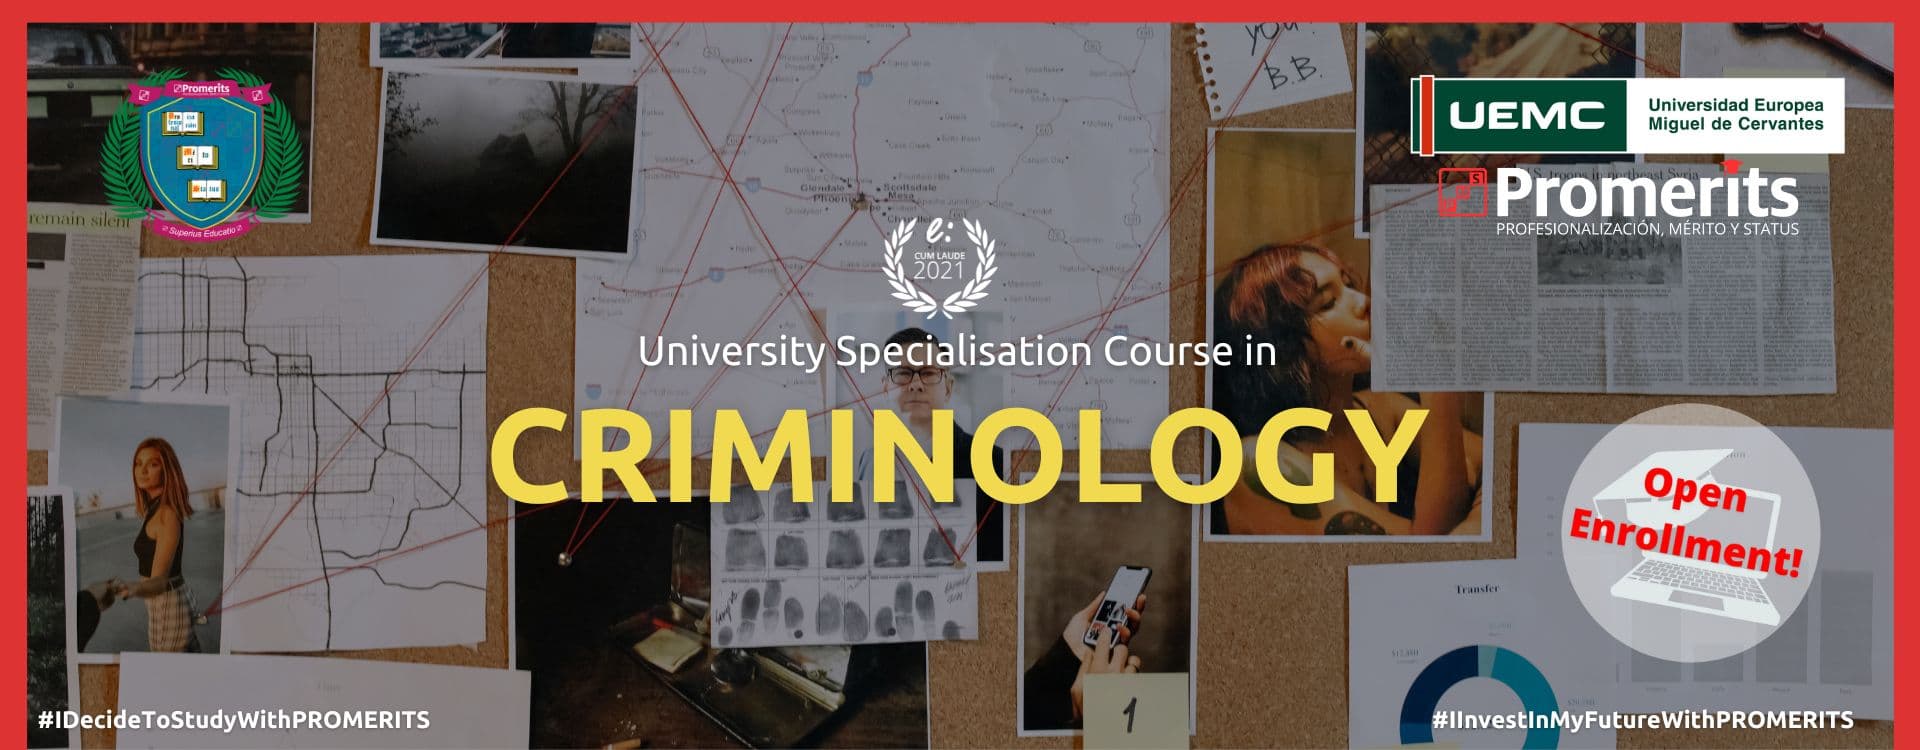 University Specialization Course in Criminology